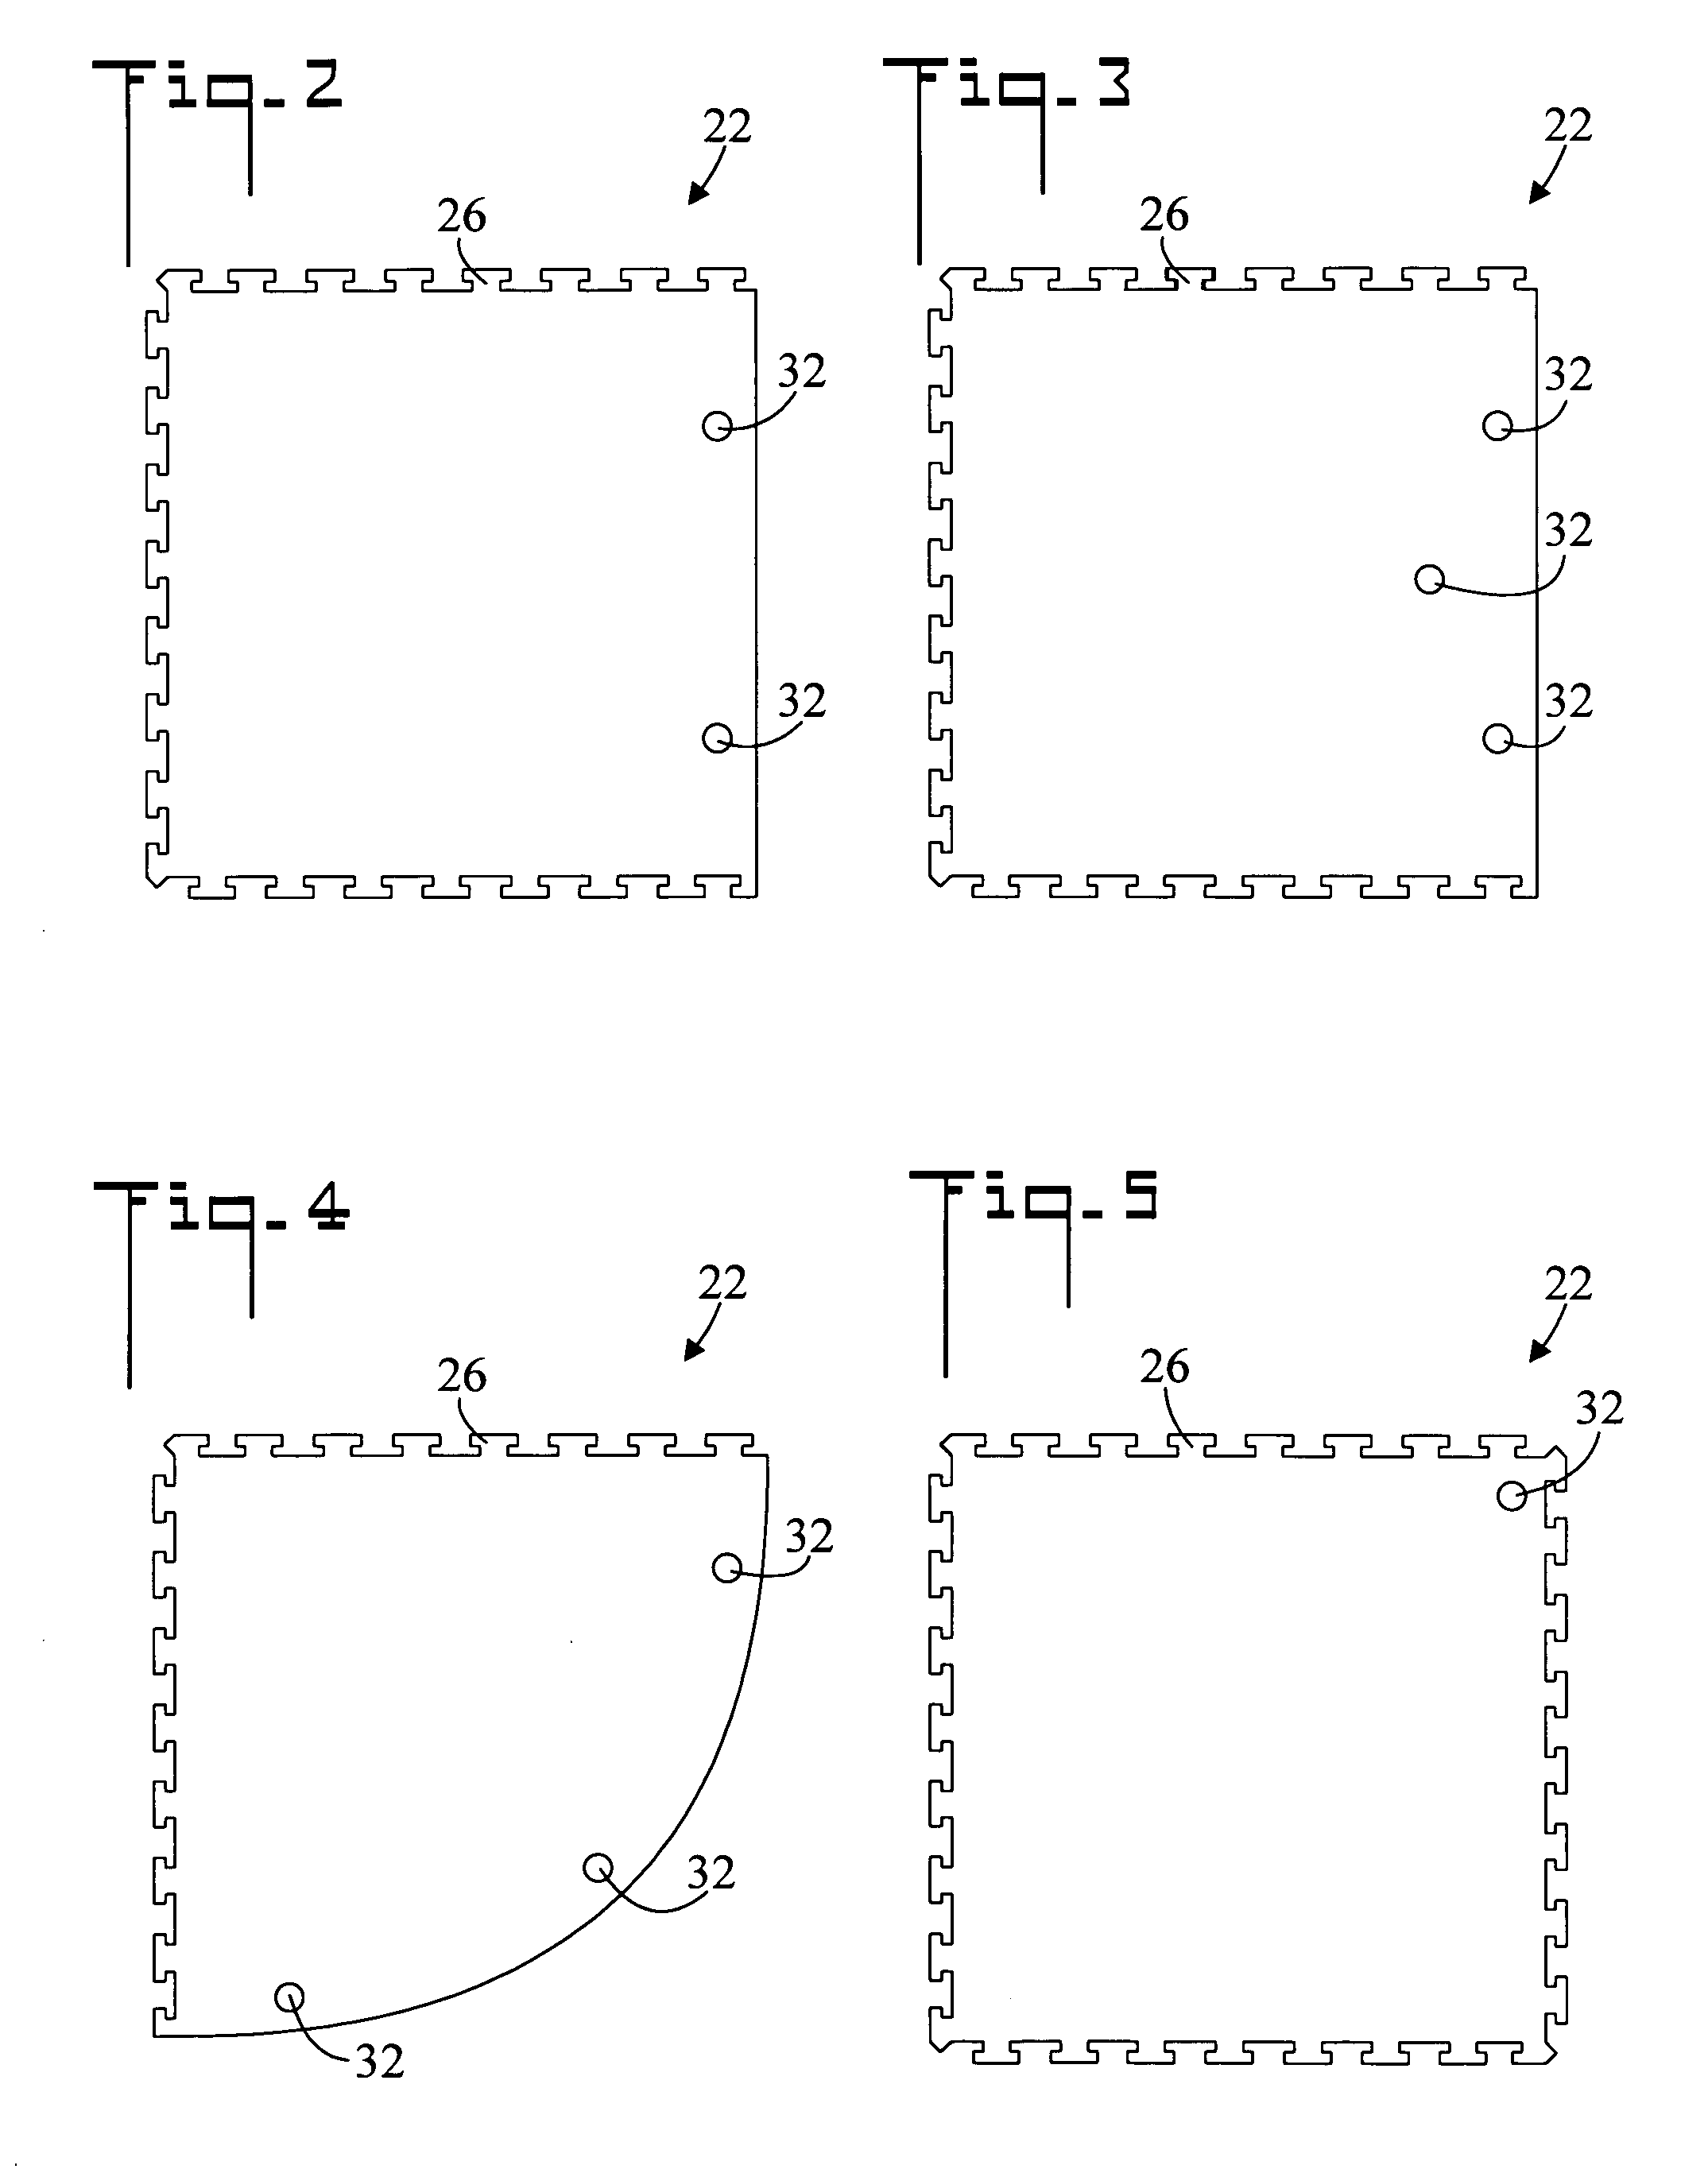 Method for constructing a race track for remote control toy vehicles and apparatus therefor